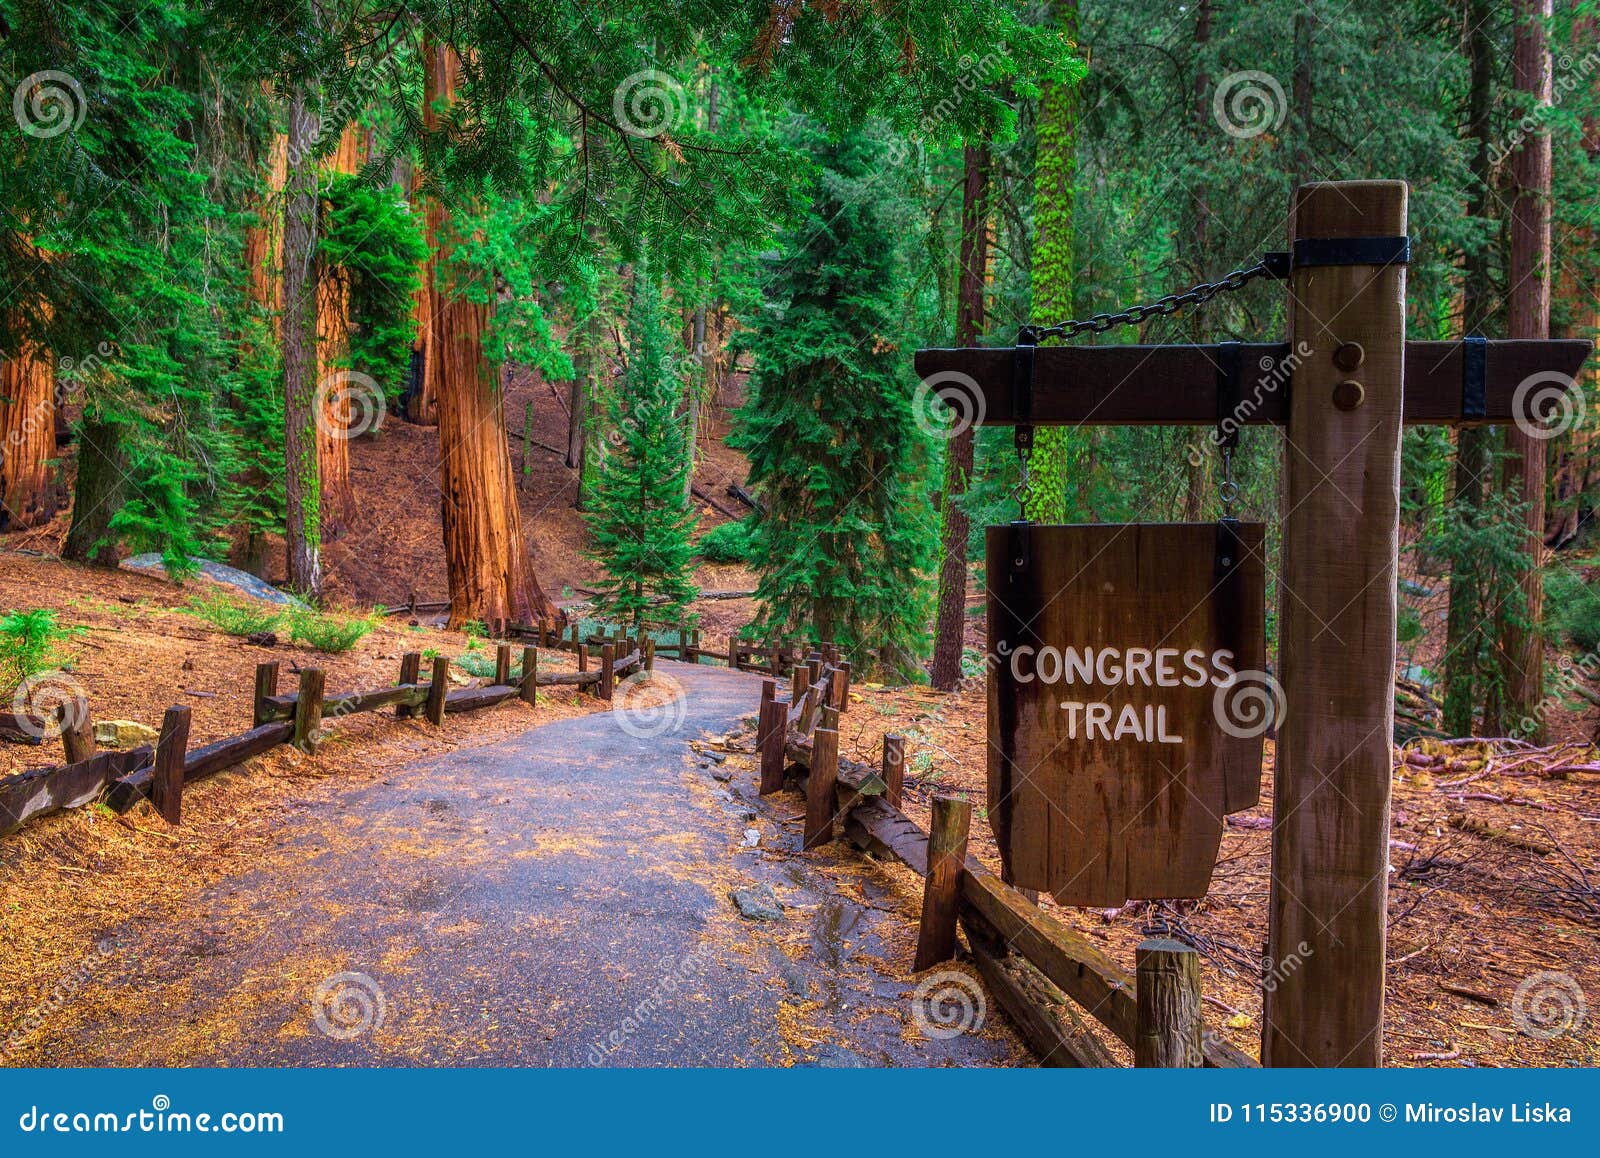 congress trail sign in sequoia national park